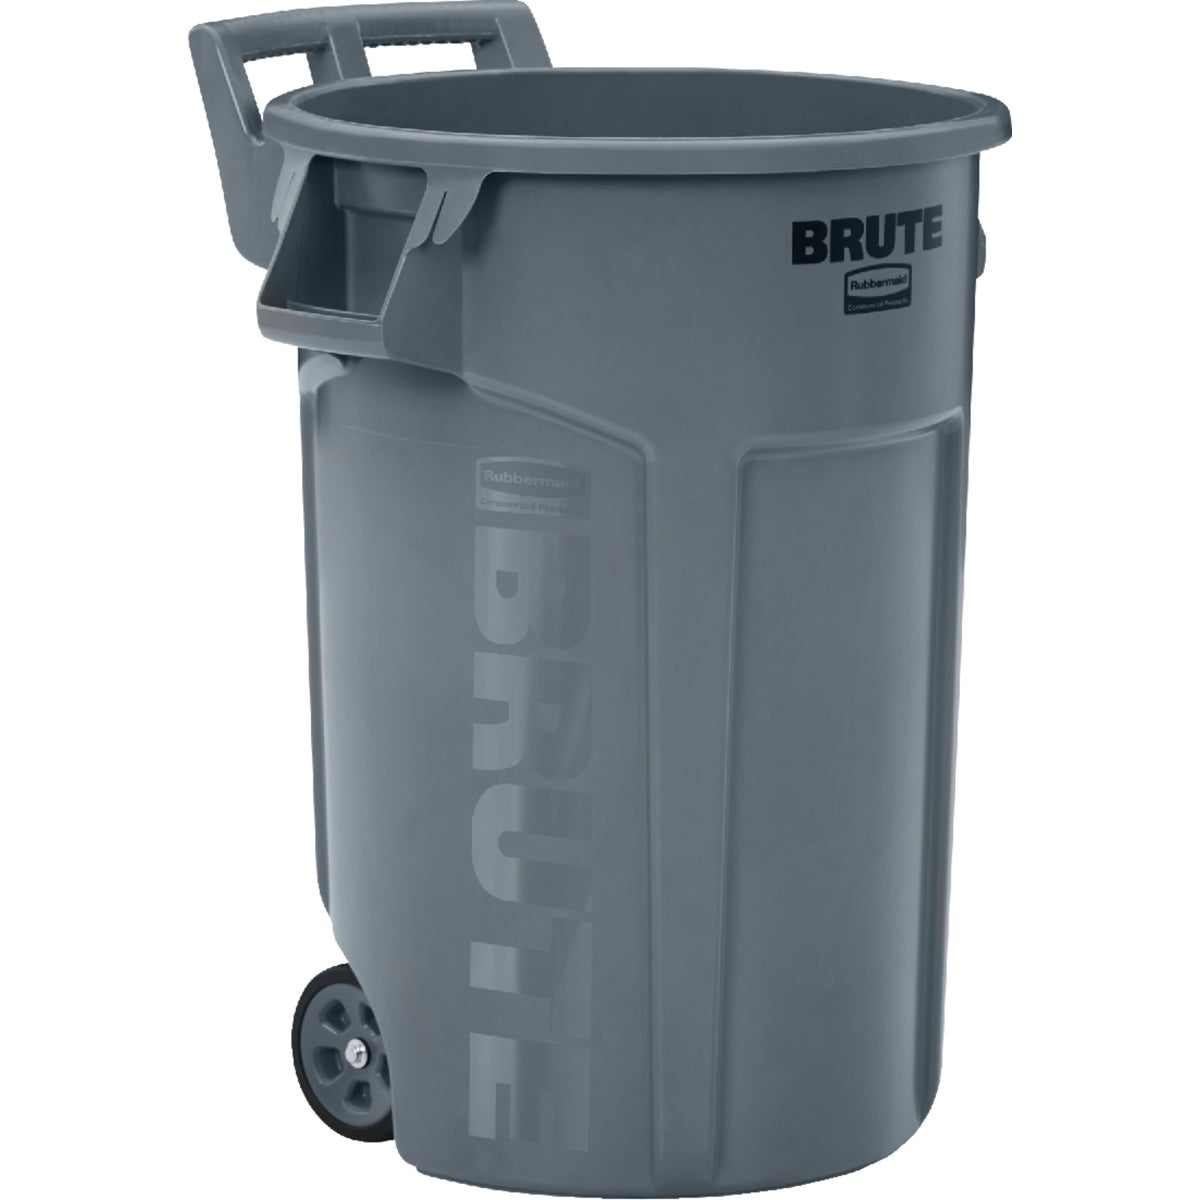 Rubbermaid Commercial Brute 44 Gal. Gray Vented Wheeled Container